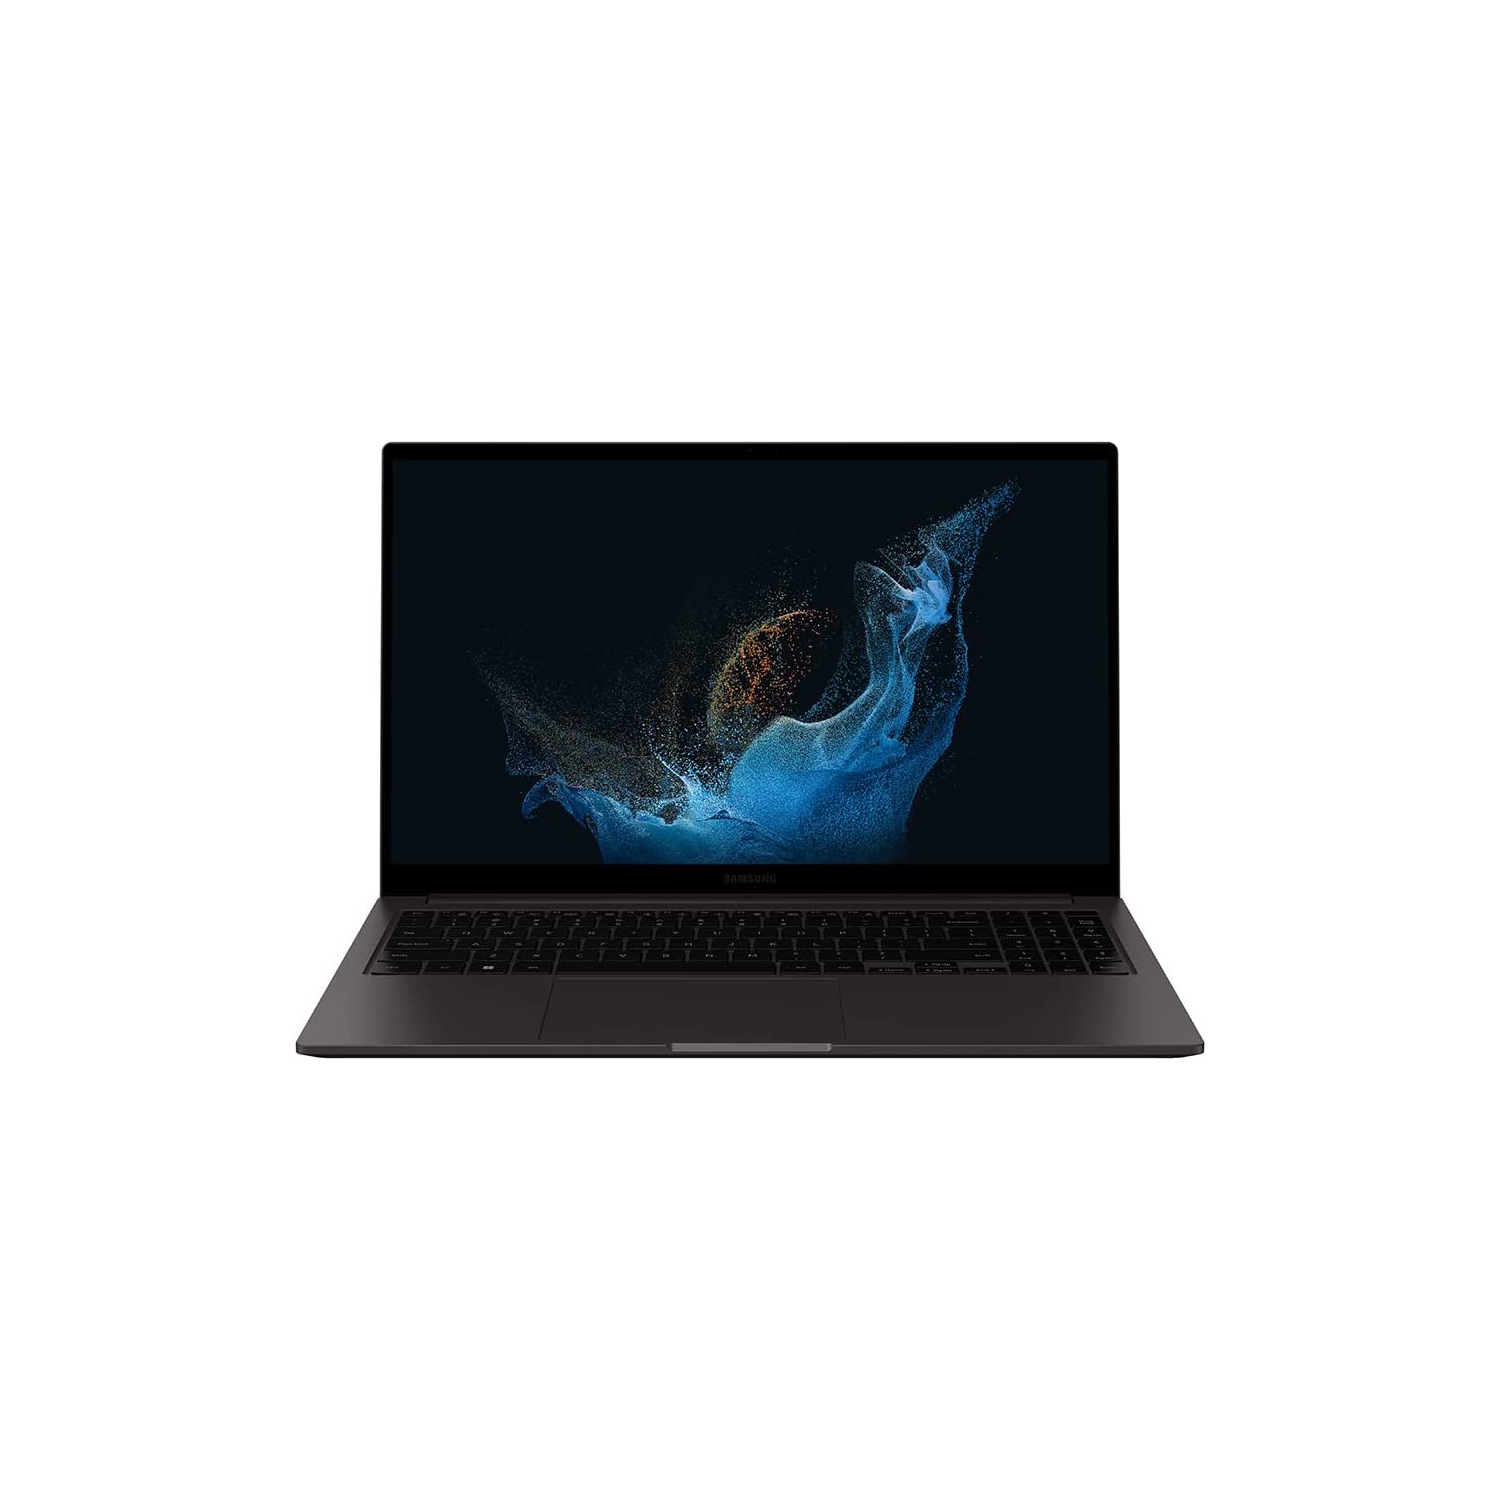 OPEN BOX - Samsung Galaxy Book2 Pro 360 13.3 Inch Amoled i5 (intel 12th Gen) | NP930QED-KA1CA | Graphite (S-Pen not included)